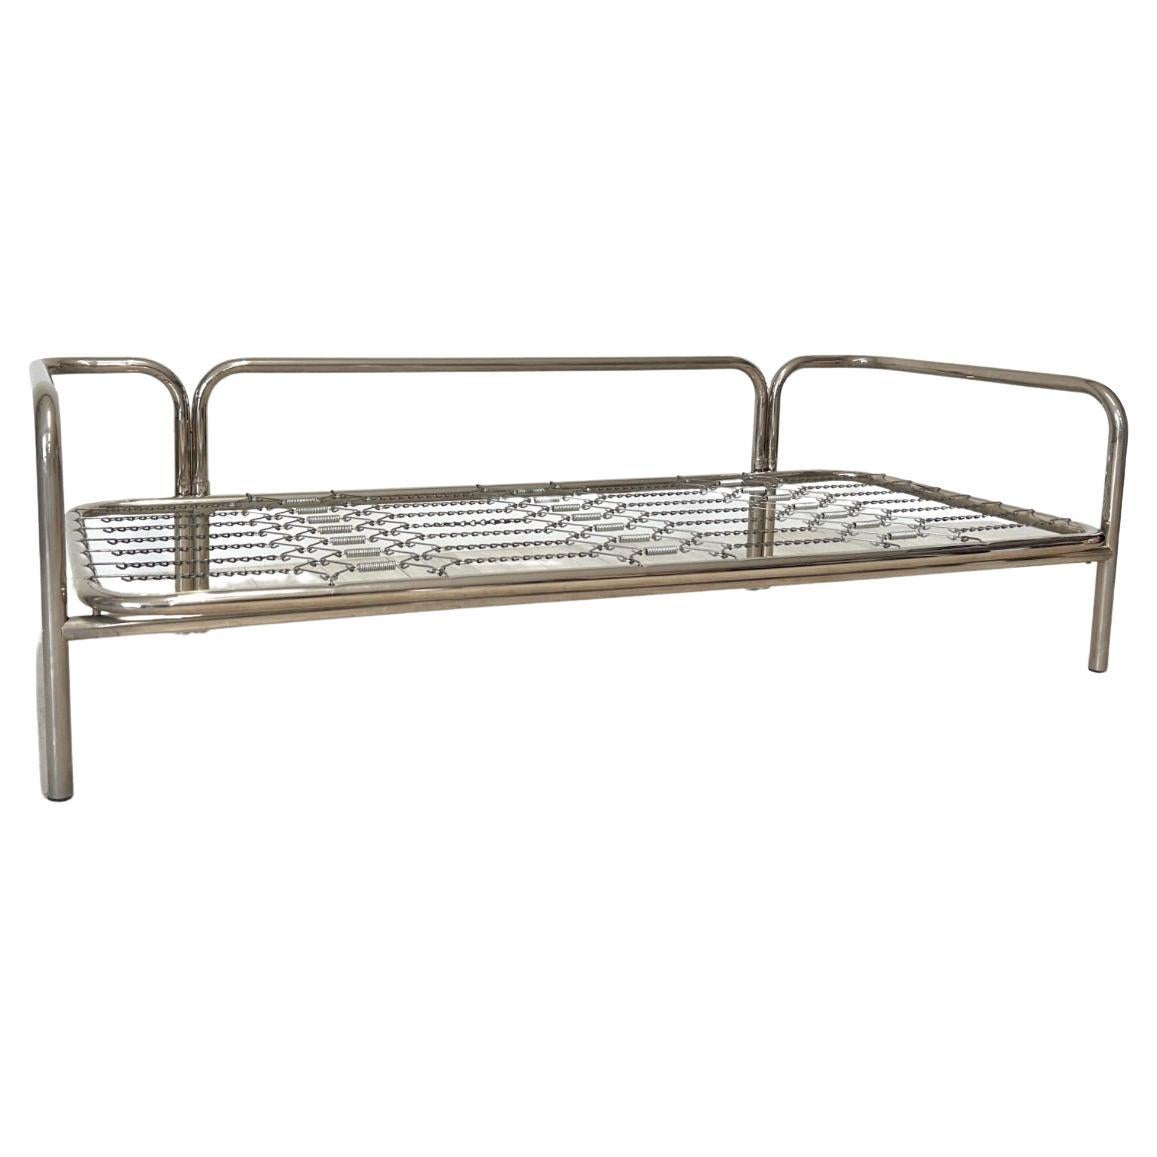 Gae Aulenti for Poltronova 'Locus Solus' day bed in chromed steel